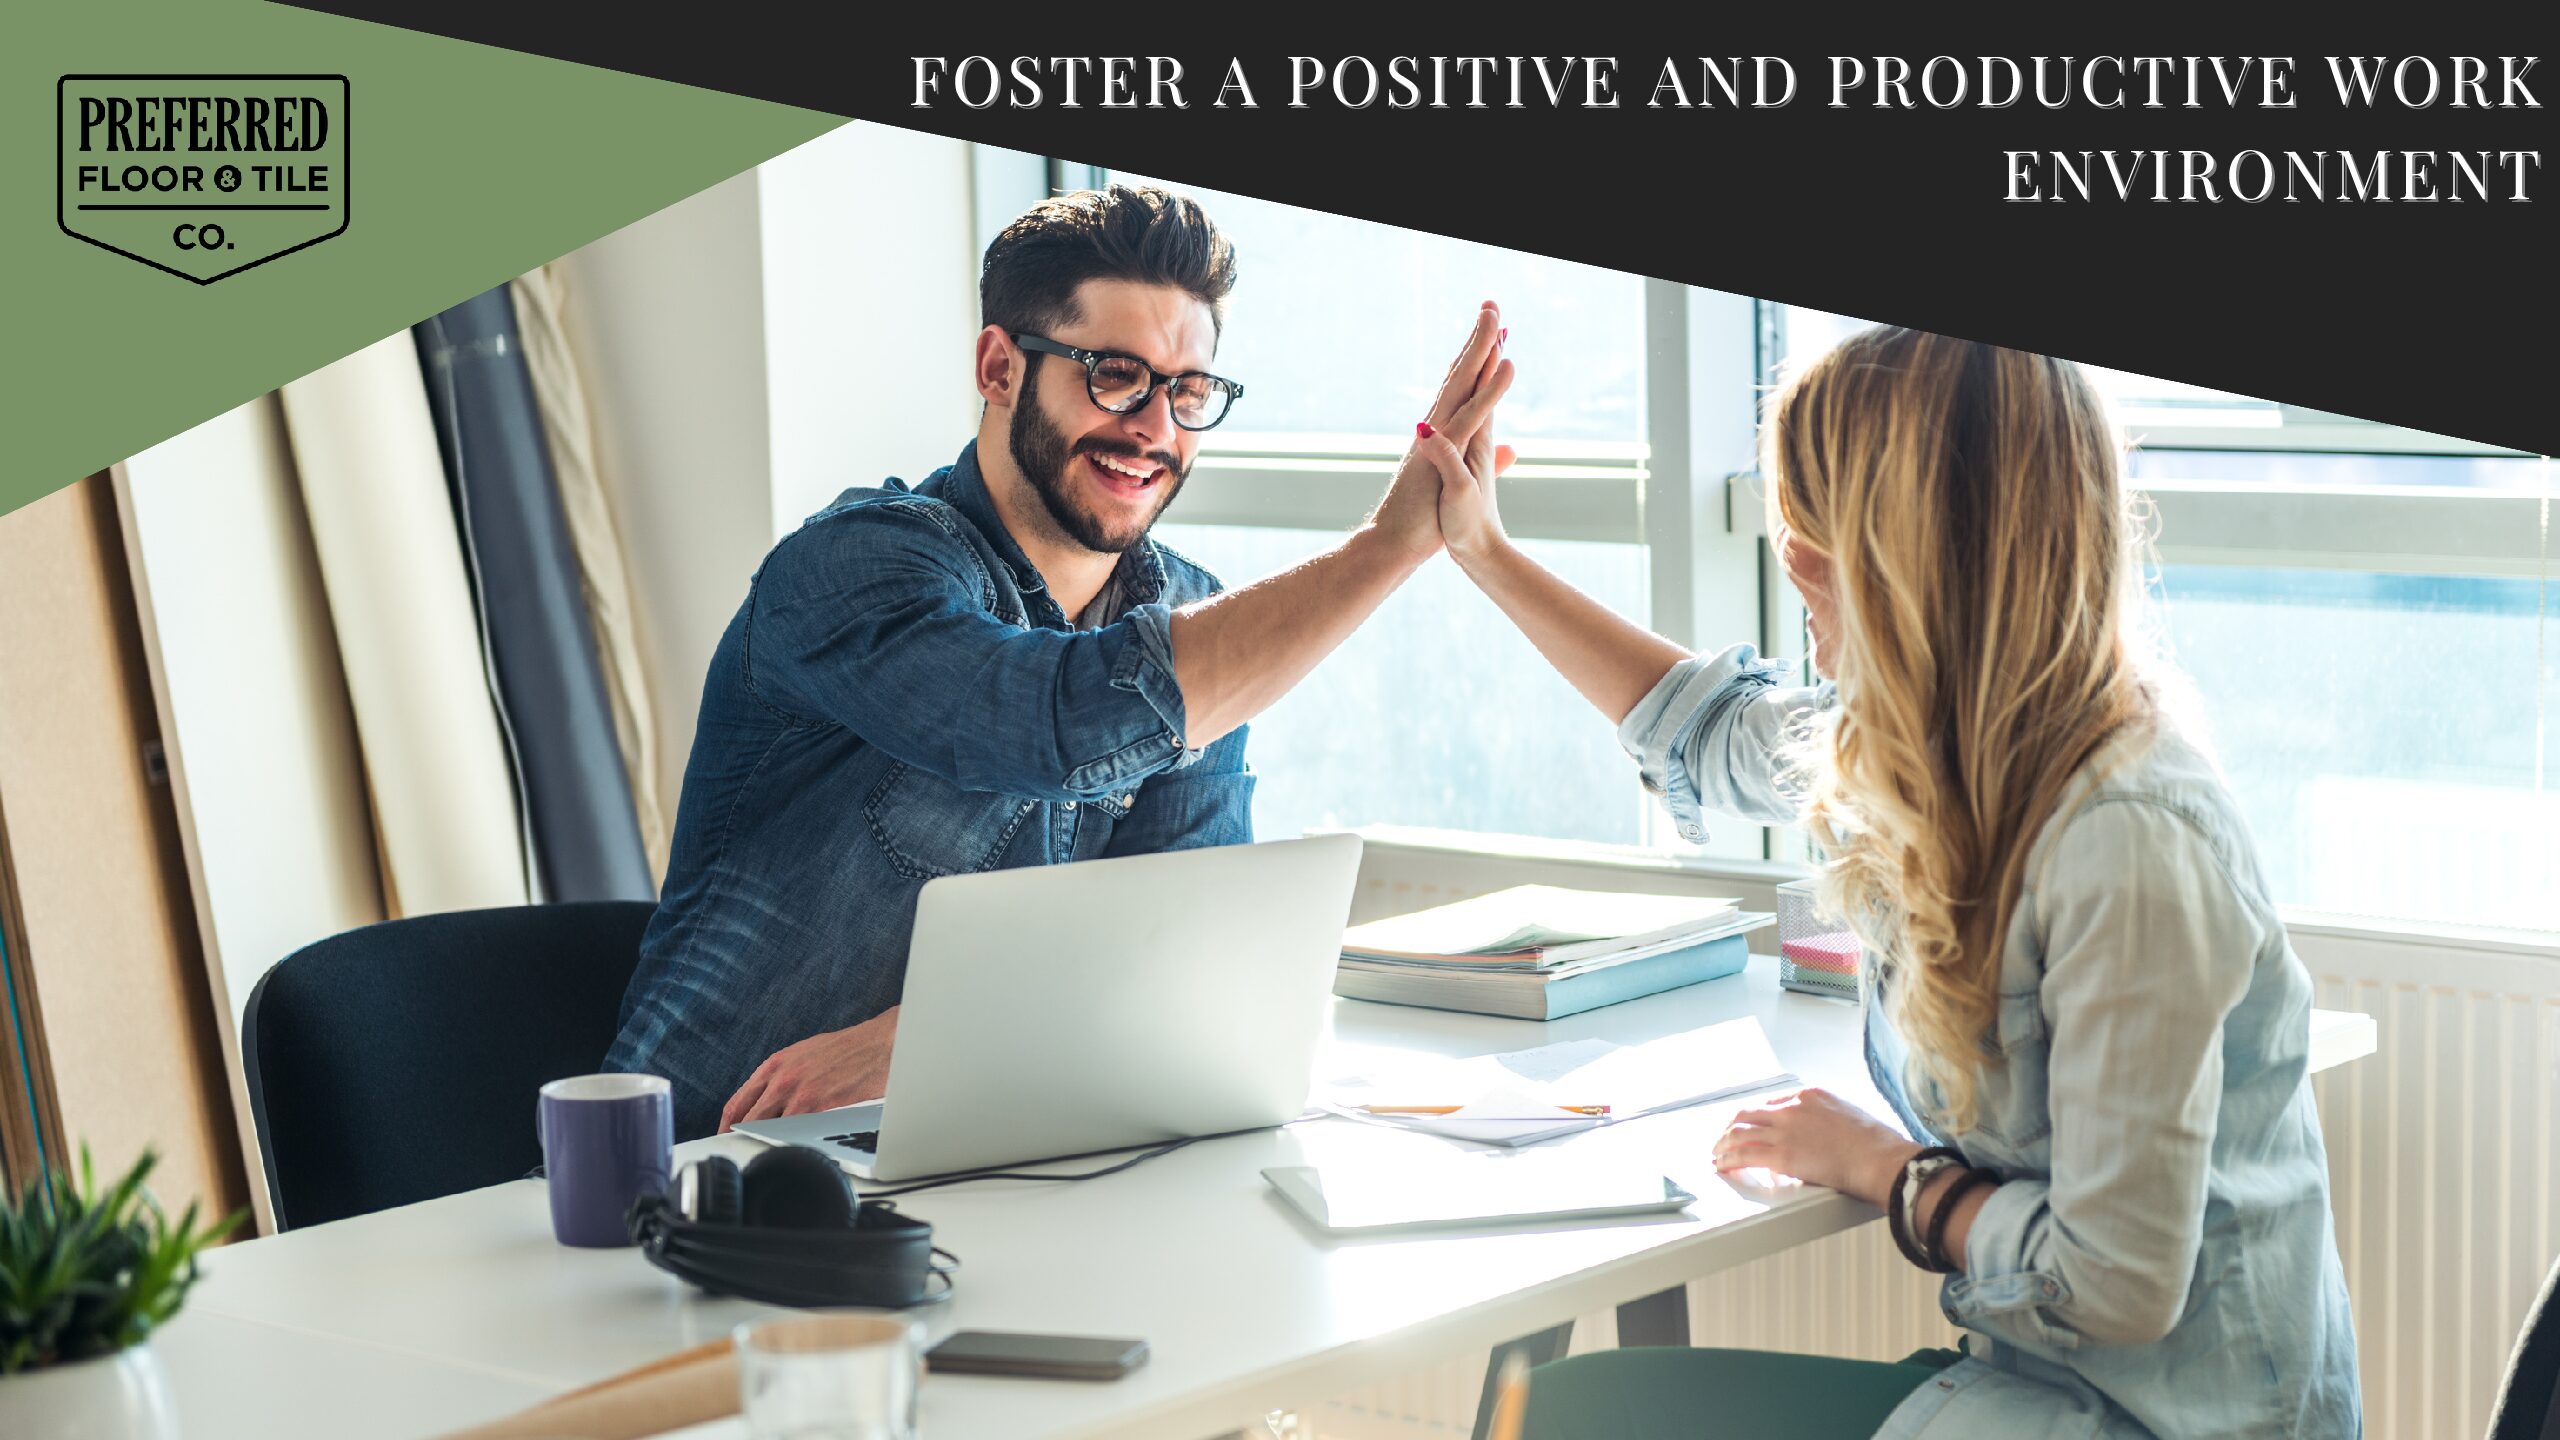 Foster A Positive and Productive Work Environment